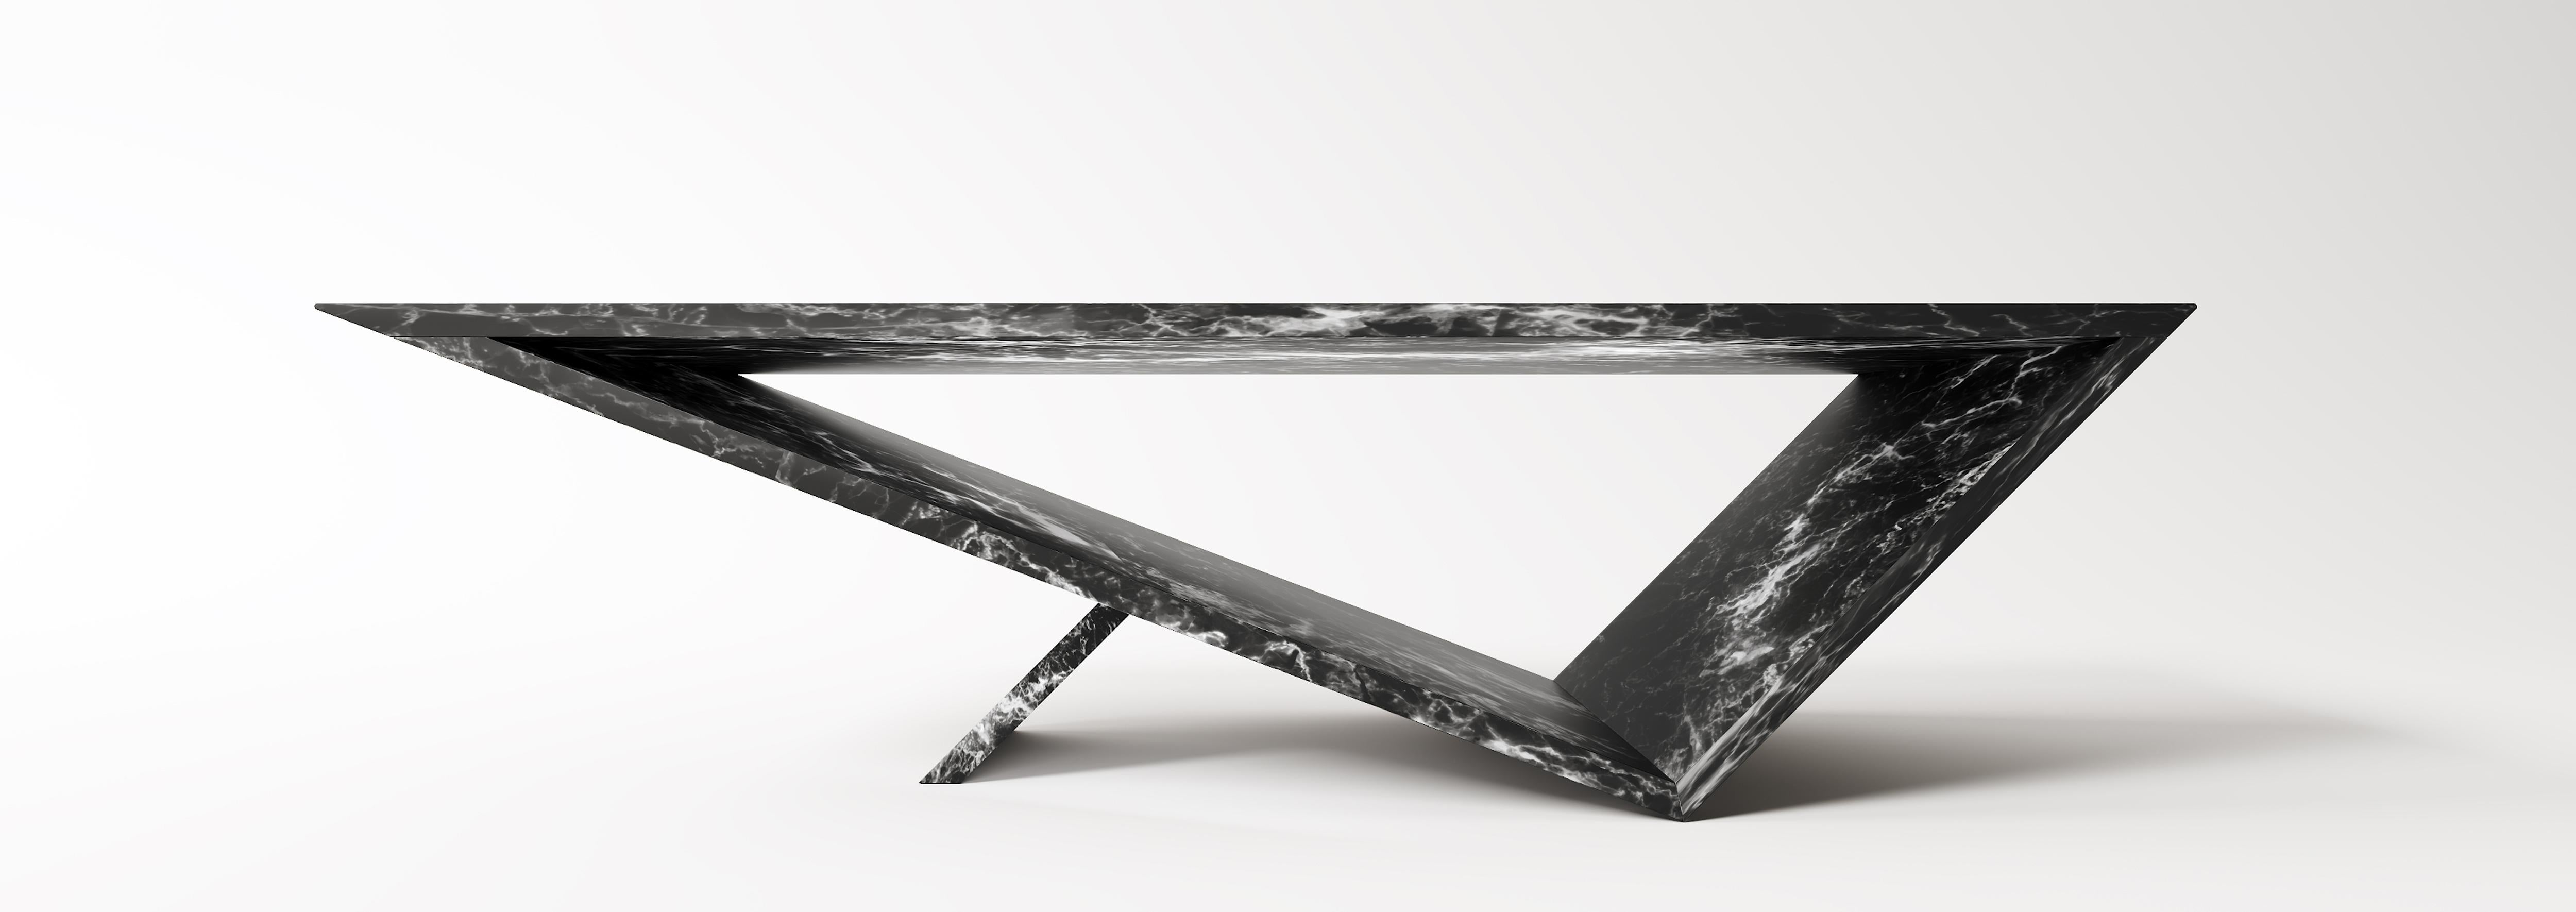 American Time/Space Portal Table, Marble Coffee Table, a Collection by Neal Aronowitz For Sale